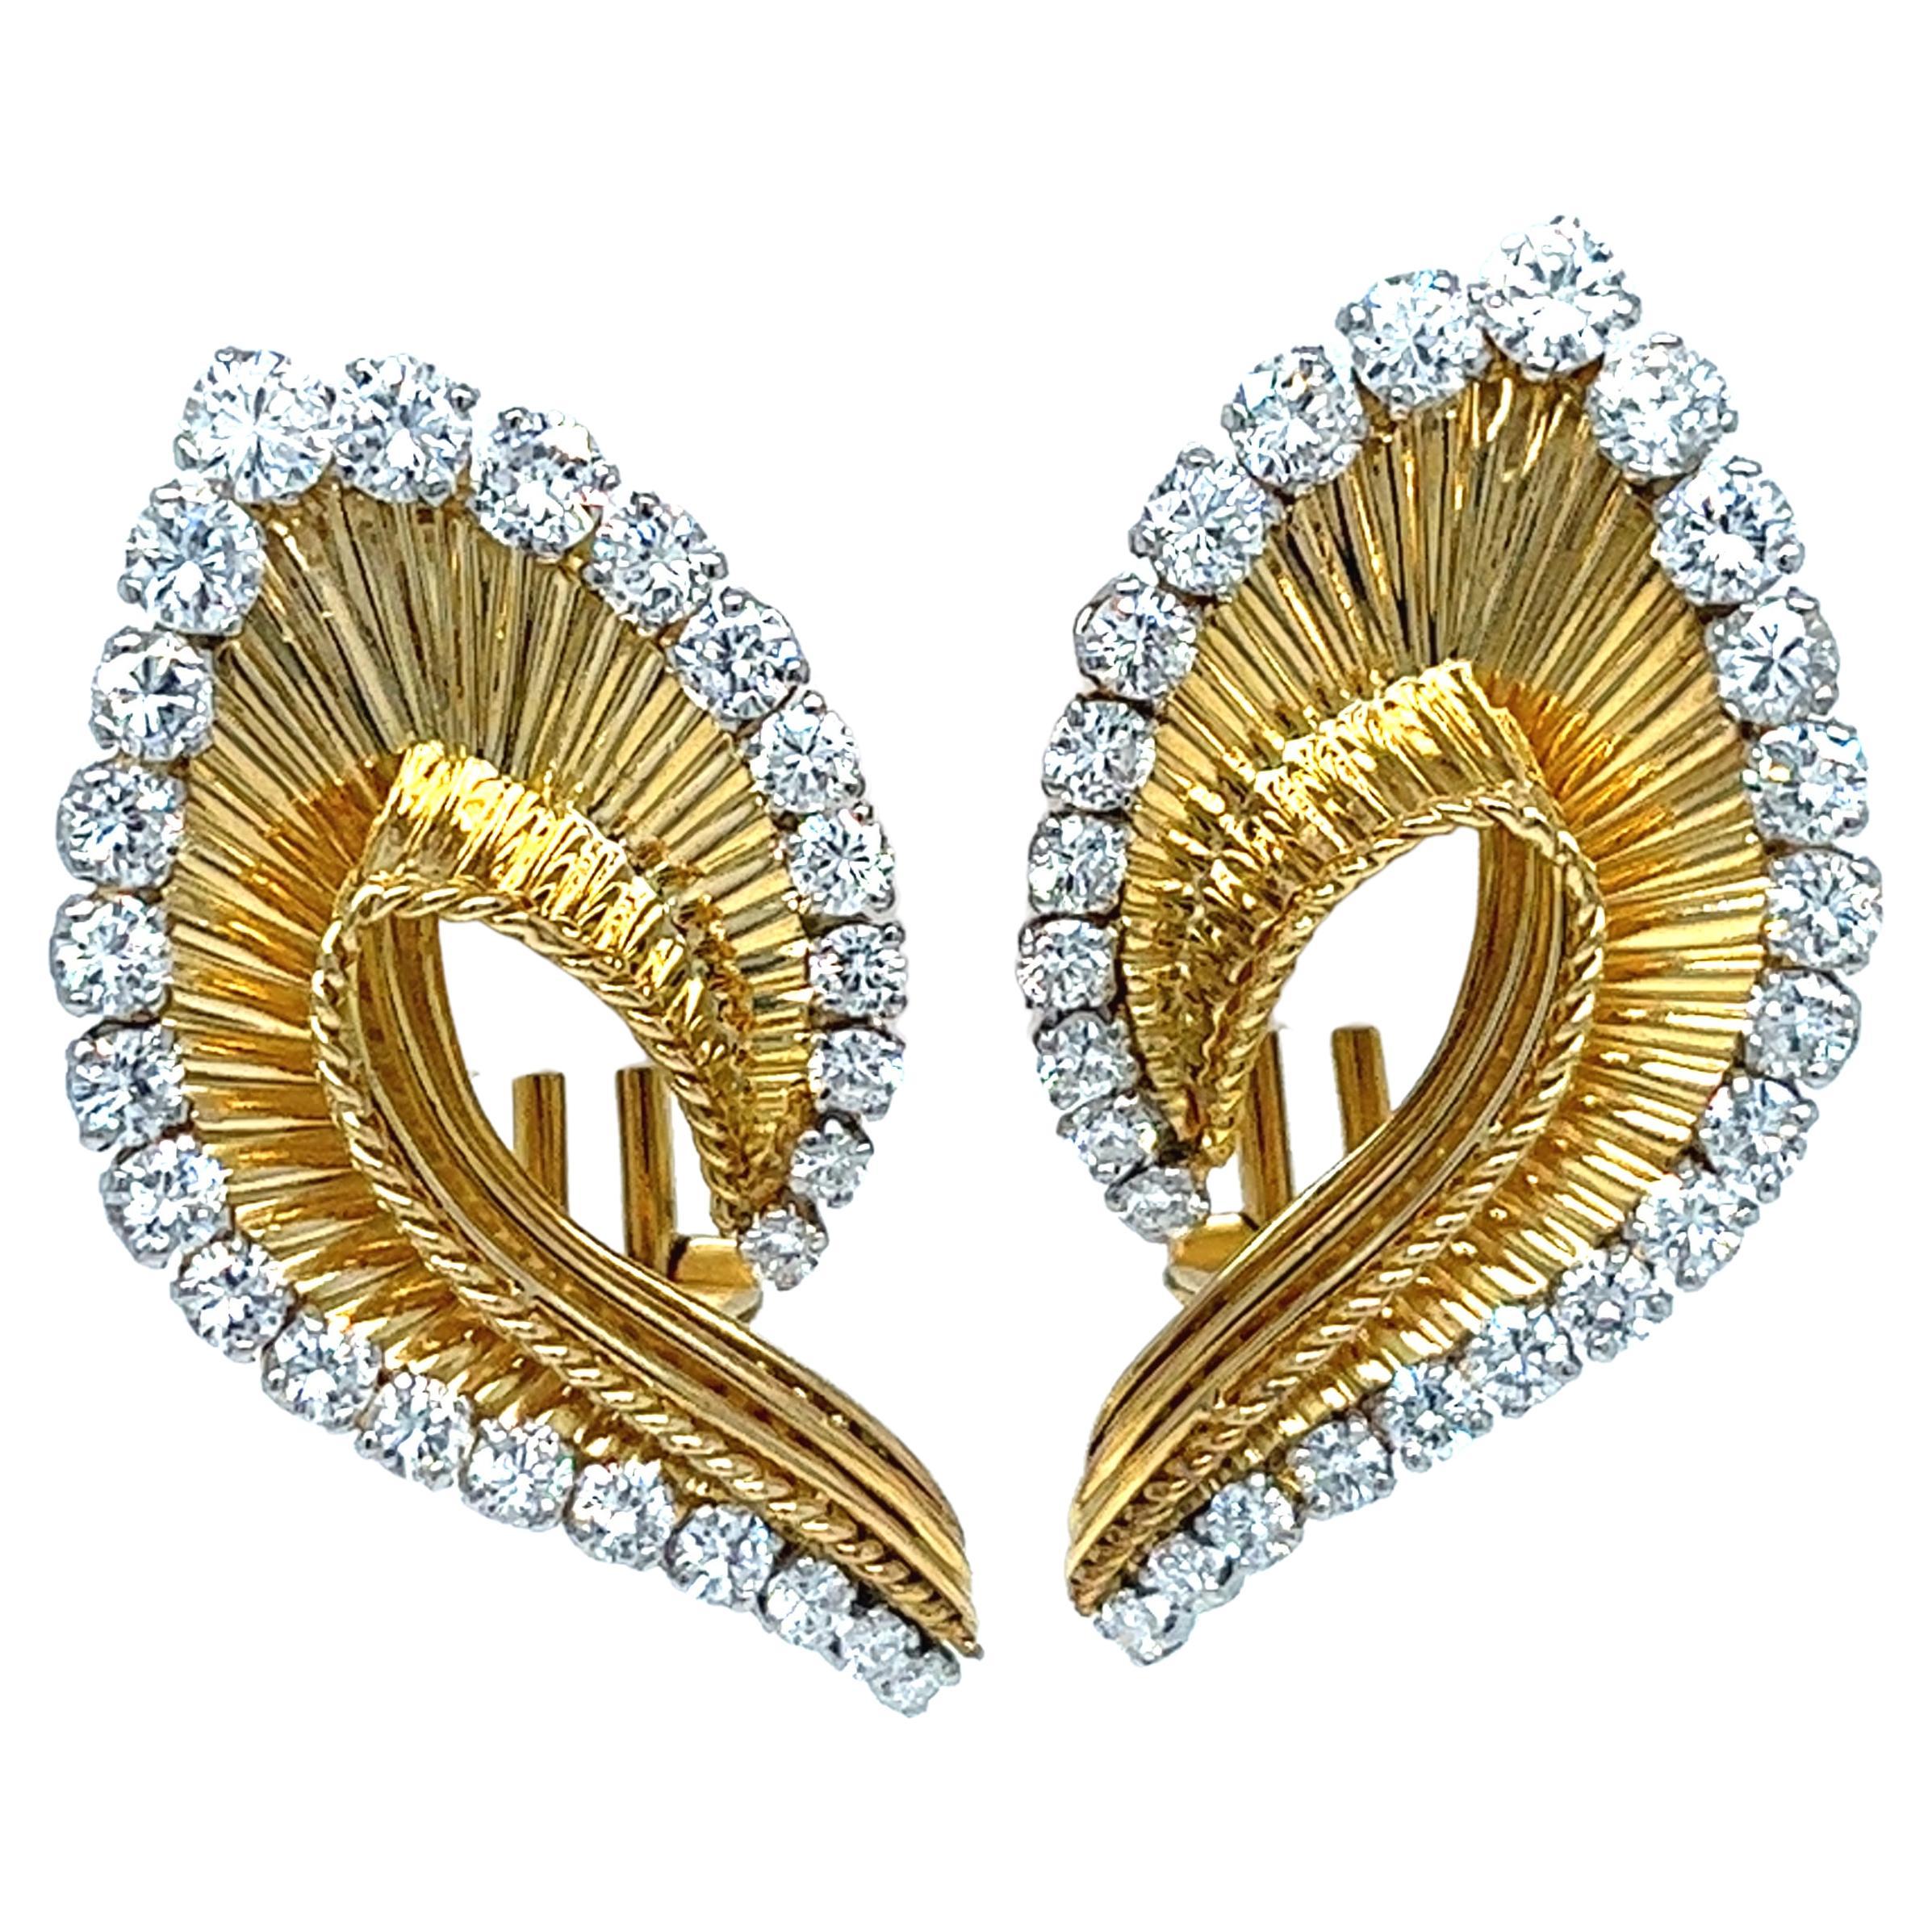 Leaf Design Earrings 18kt Yellow Gold Wire with 26 Diamonds Full Cut 3.08 Cts. For Sale